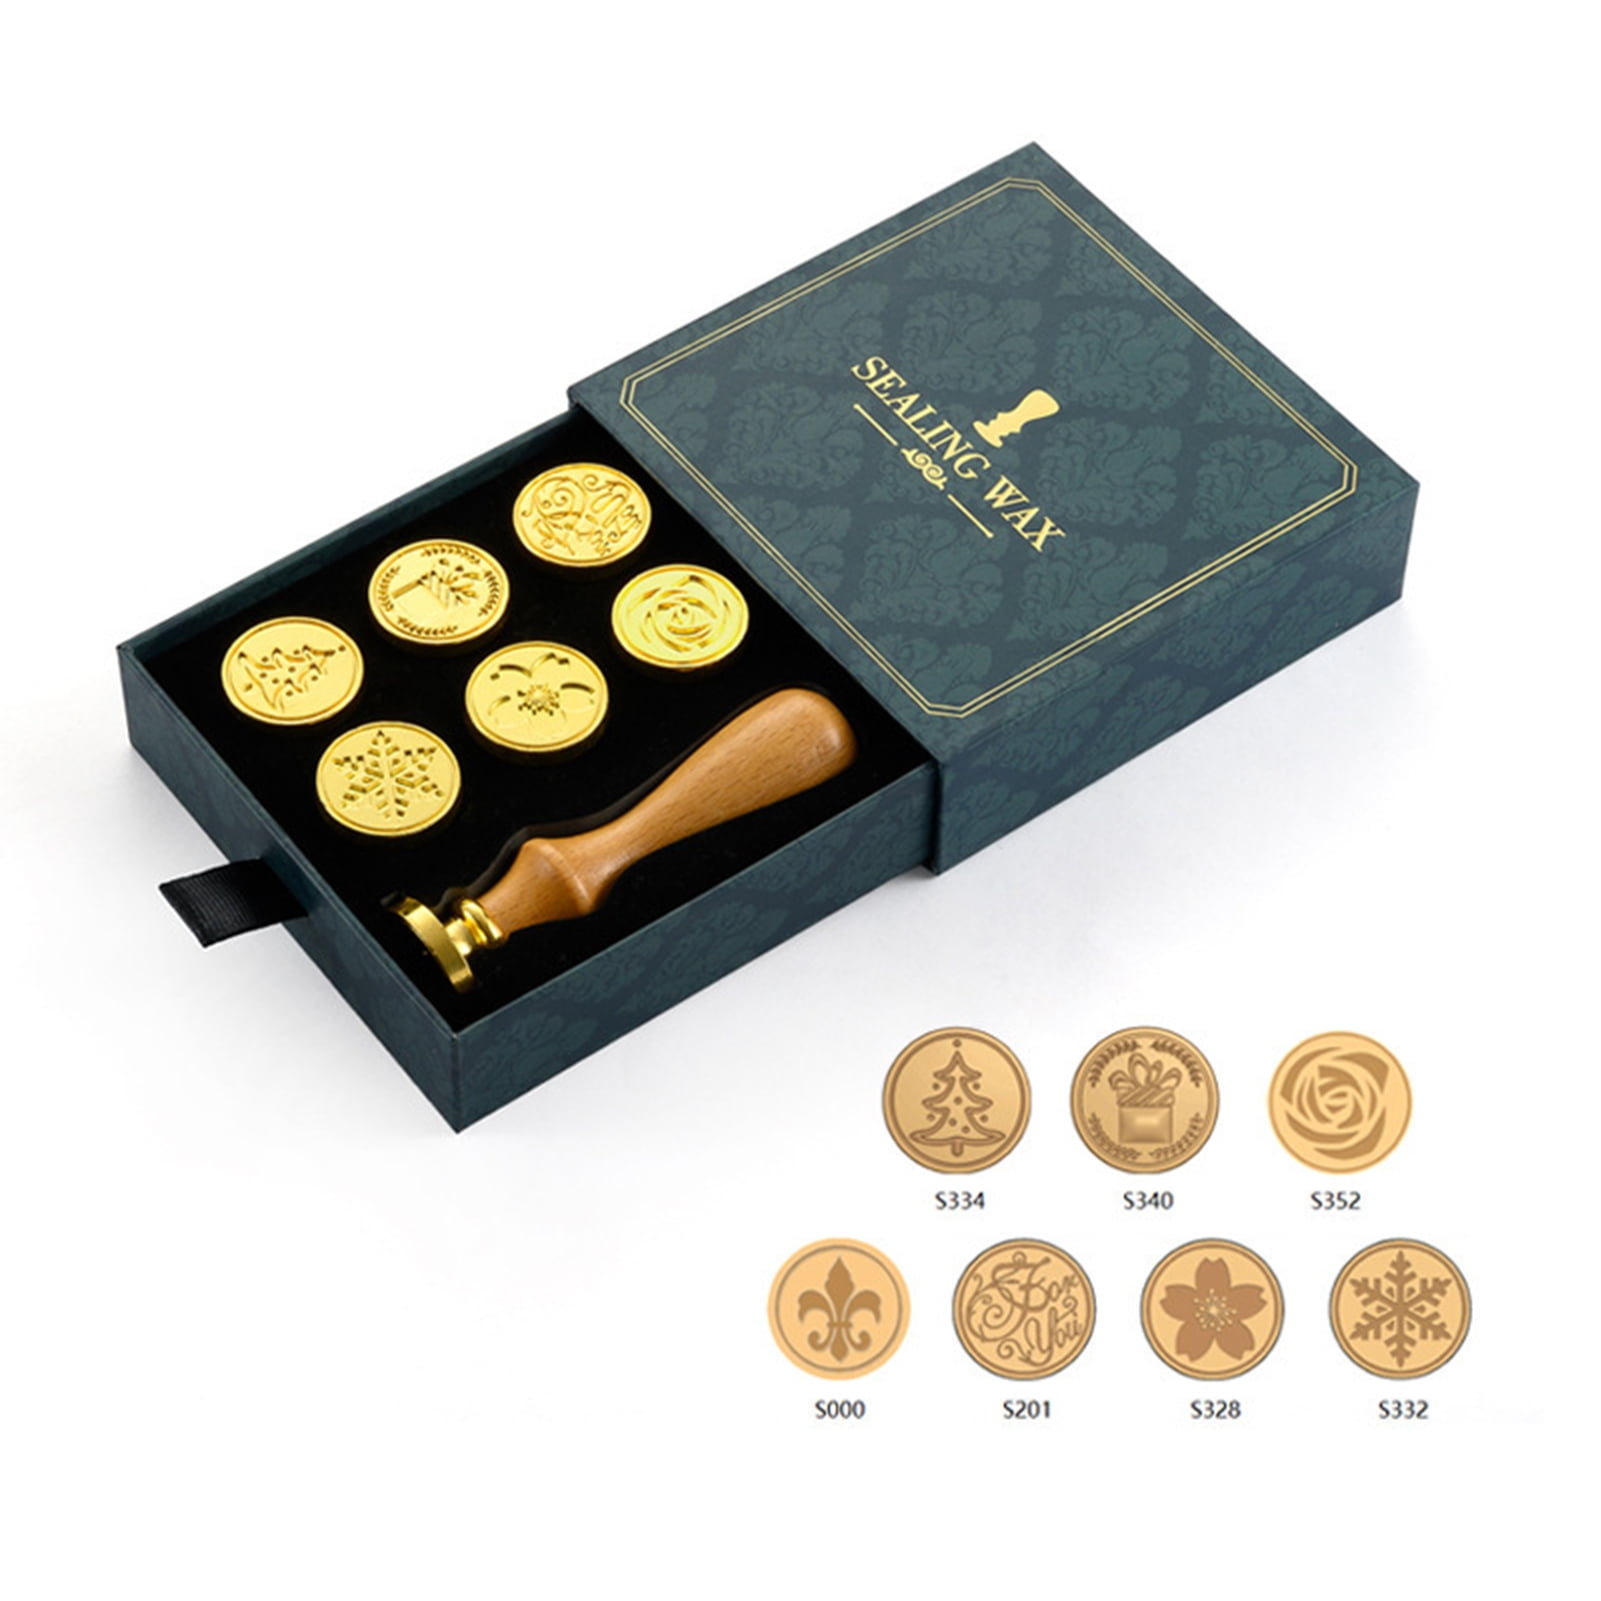 New 6PCS Vintage Black Wax Sealing Carved Sticks for Wax Seal Sealing Stamp Decorative Wedding Invitations